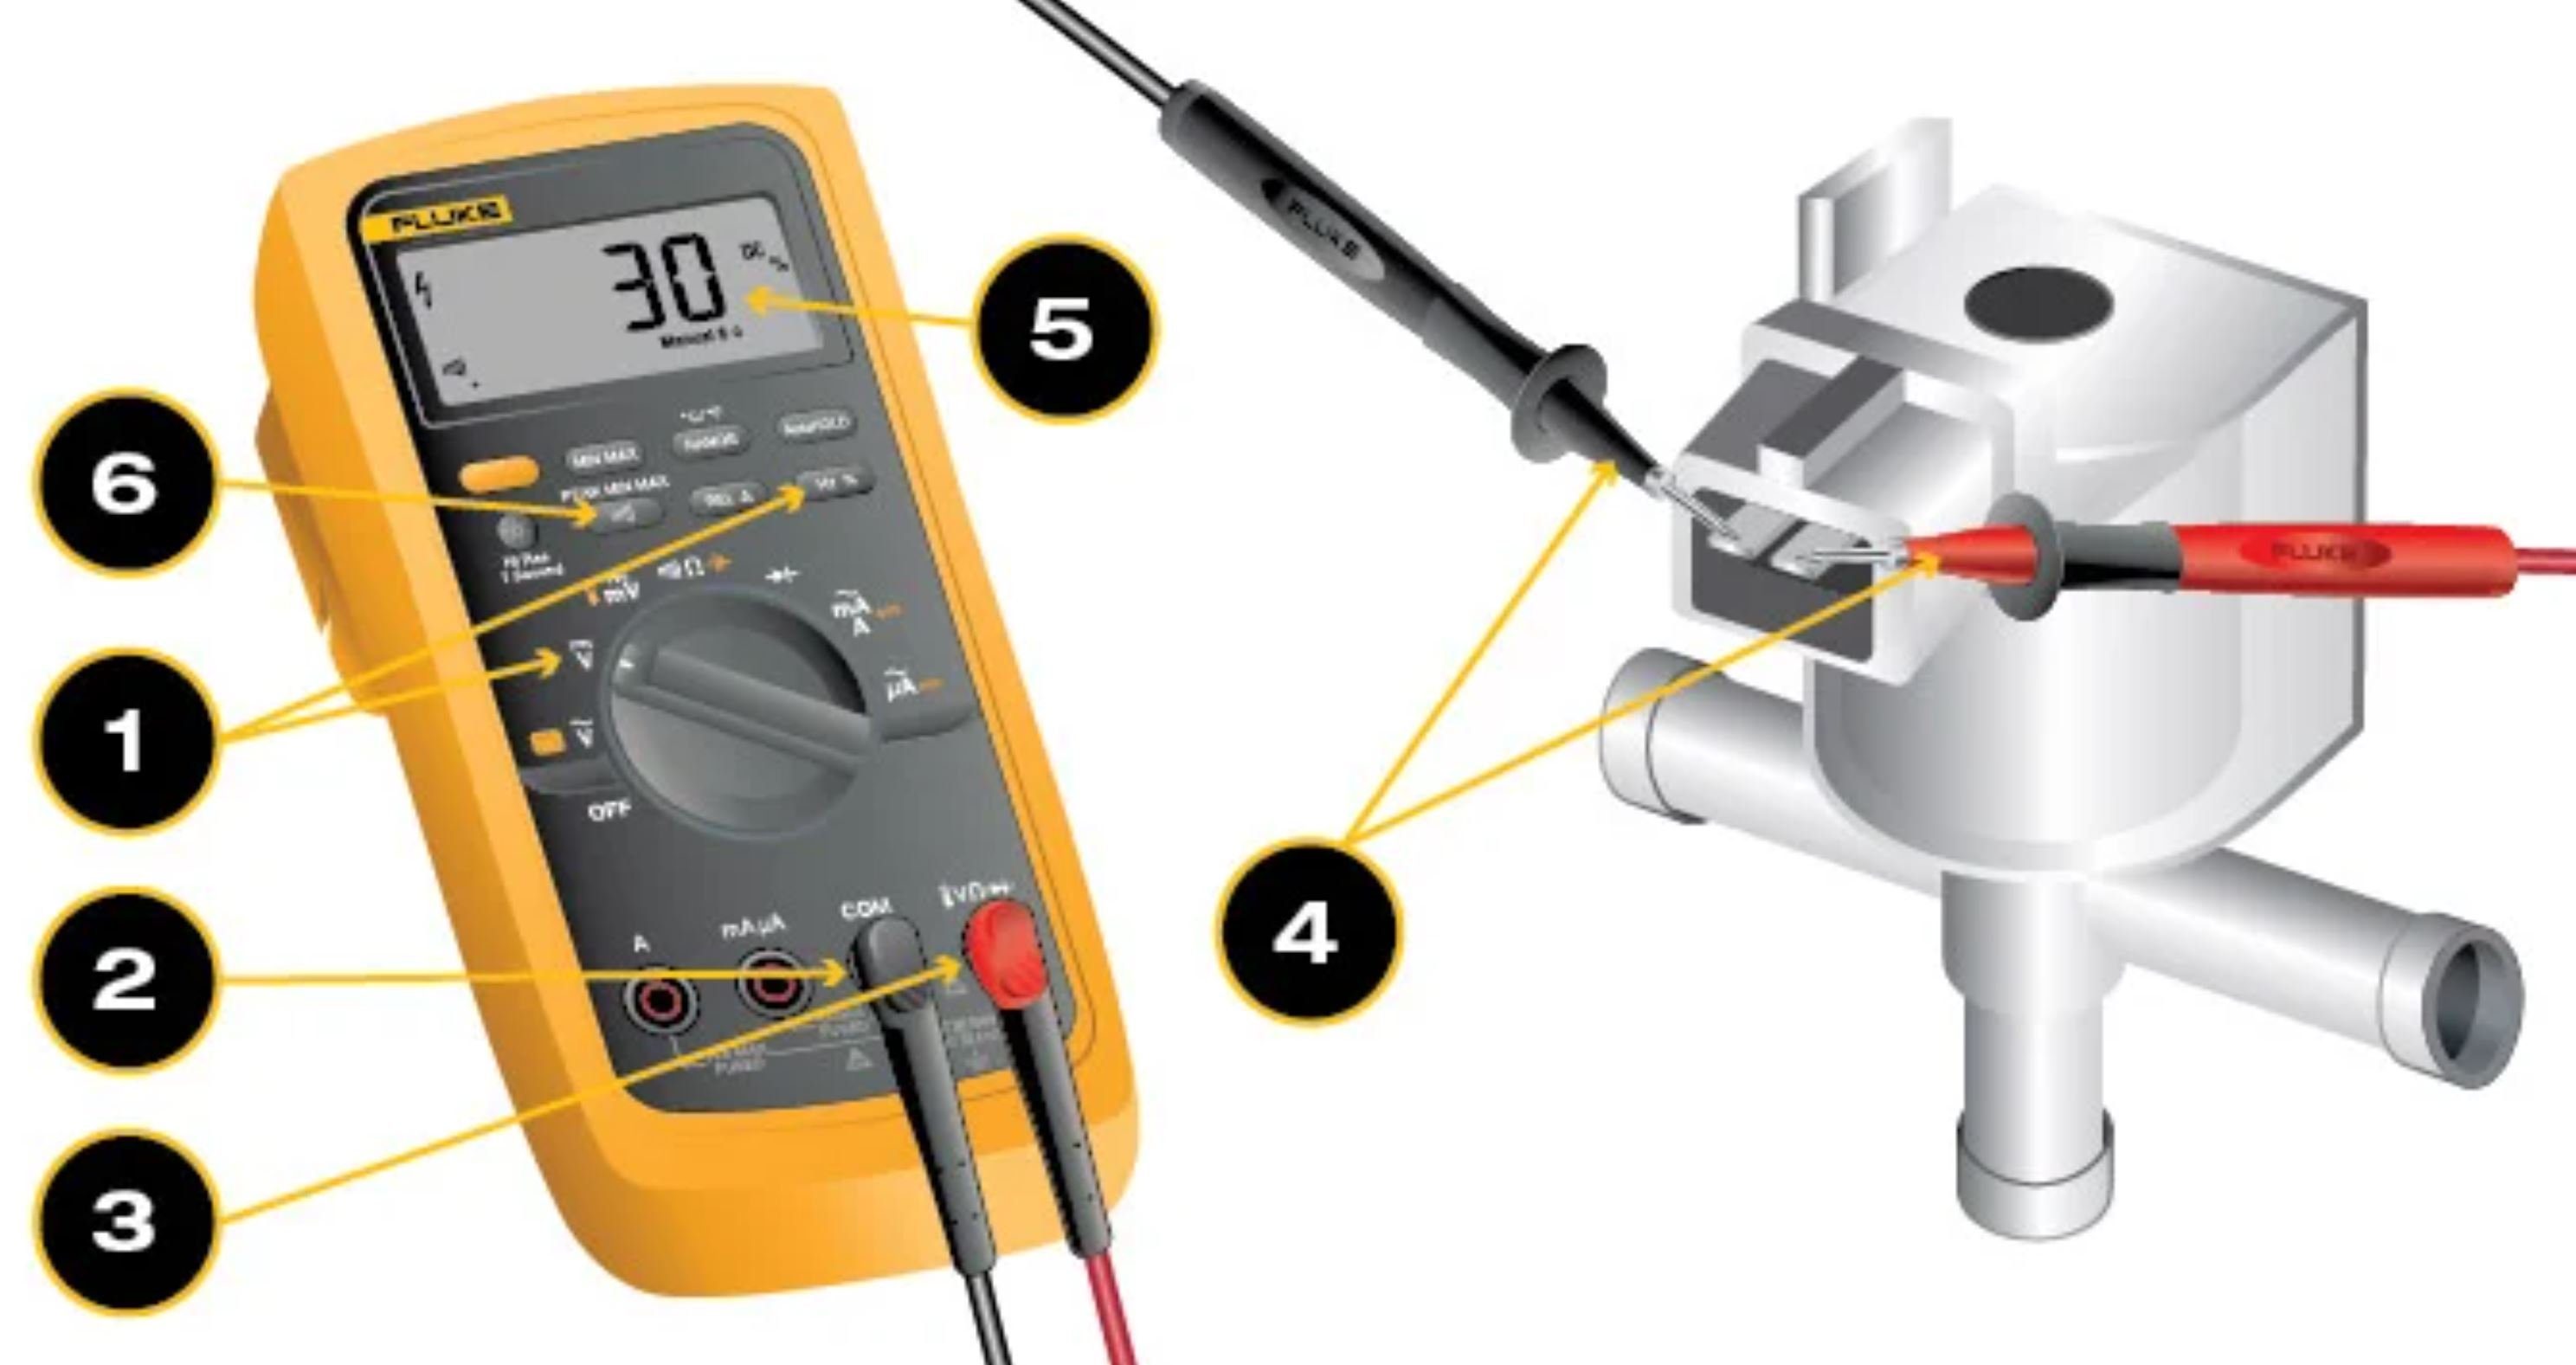 Steps for measuring duty cycle with a digital multimeter